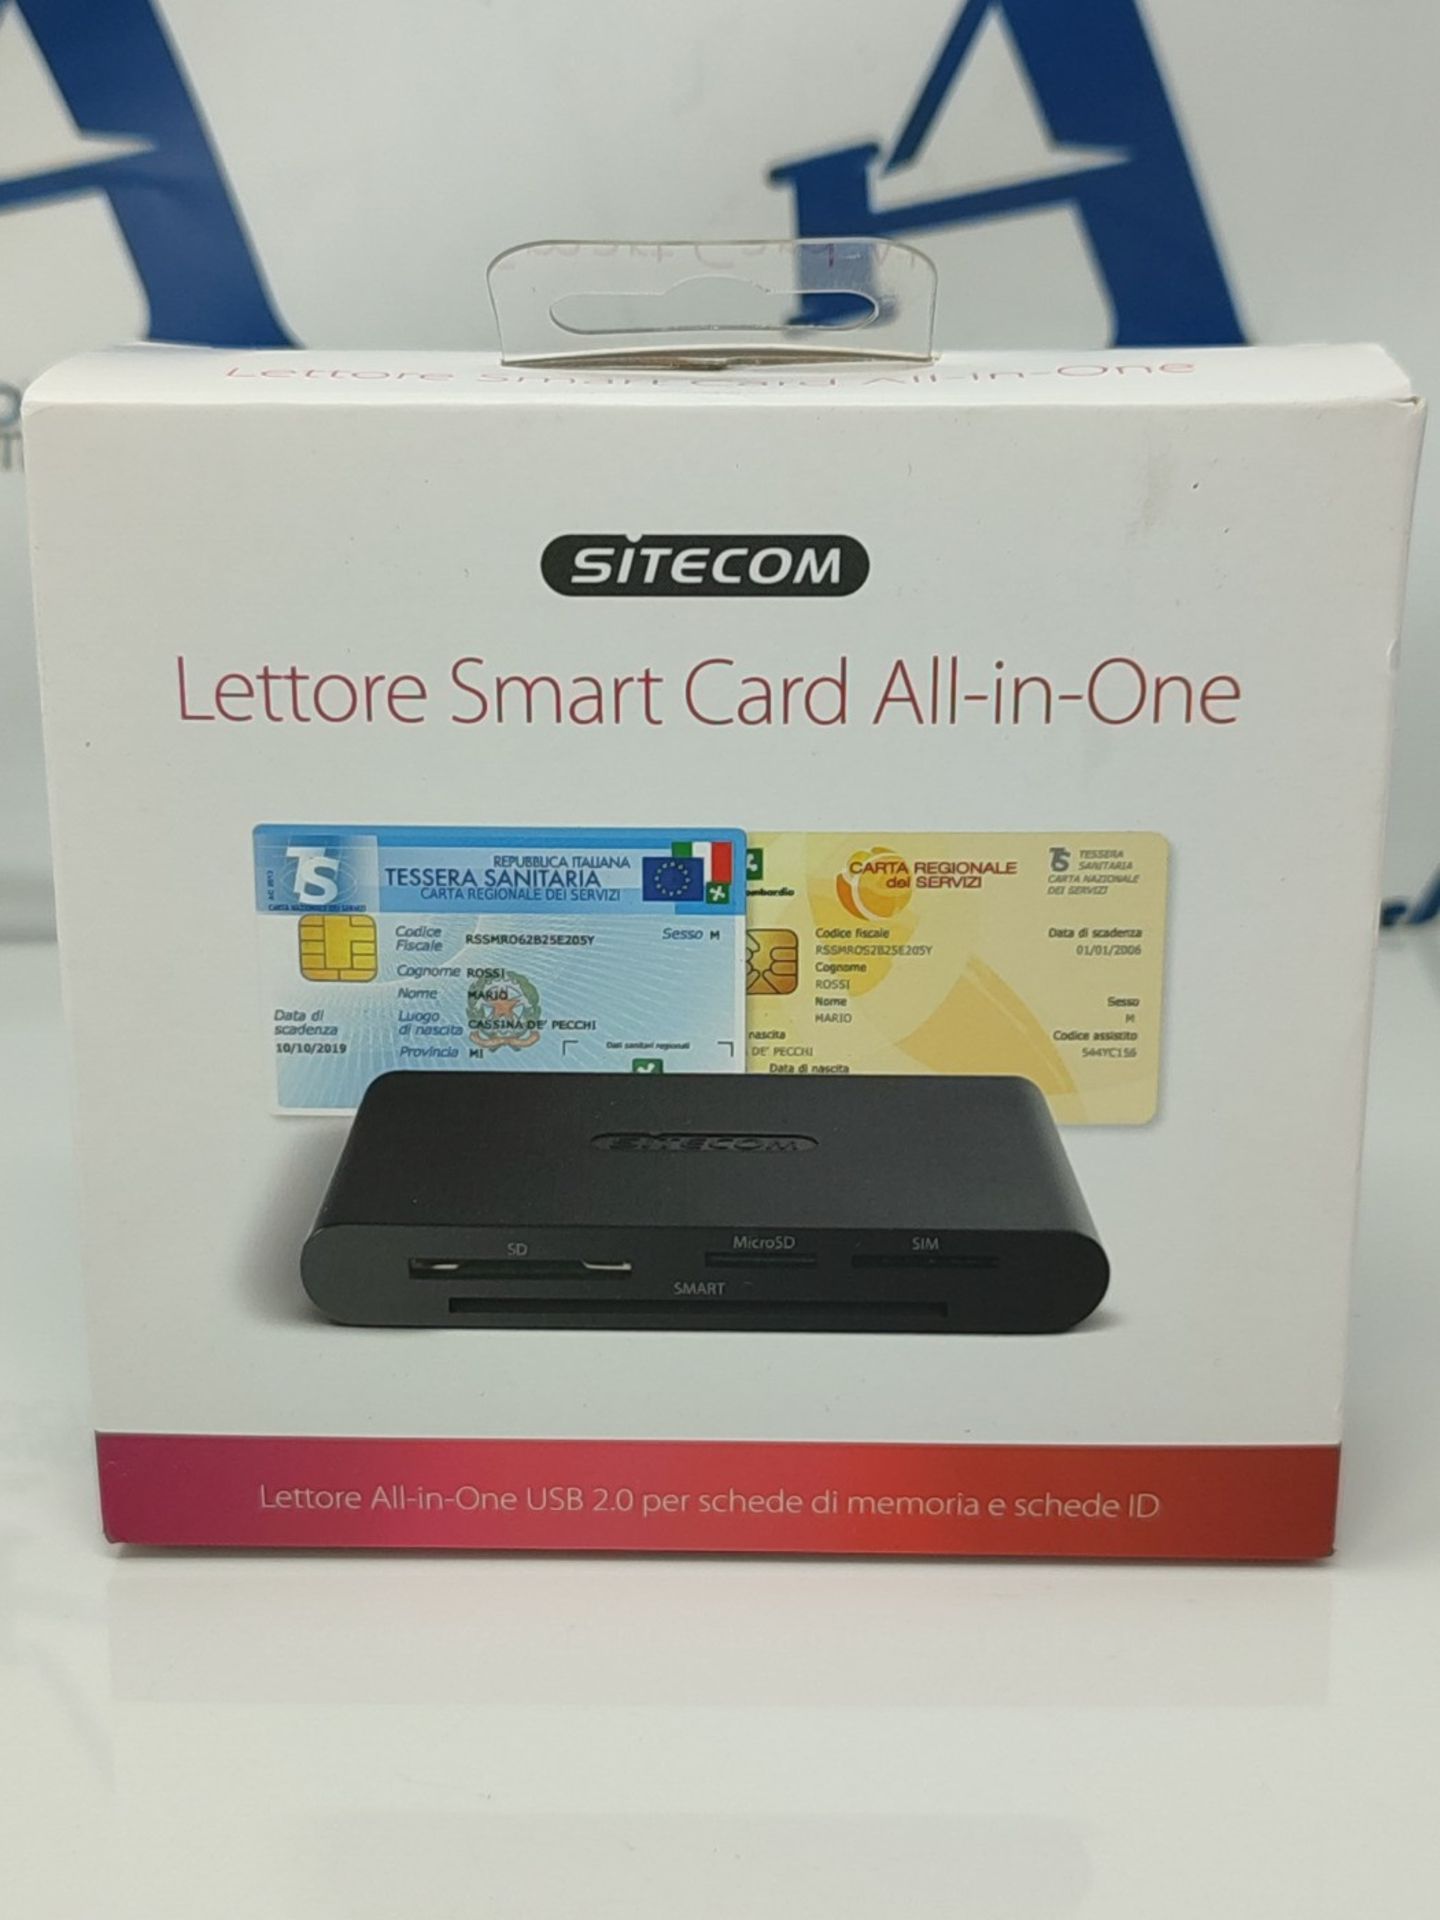 Sitecom ID Card Reader All-in-One USB 2.0 (Italian Version, Black/Anthracite - Image 2 of 3